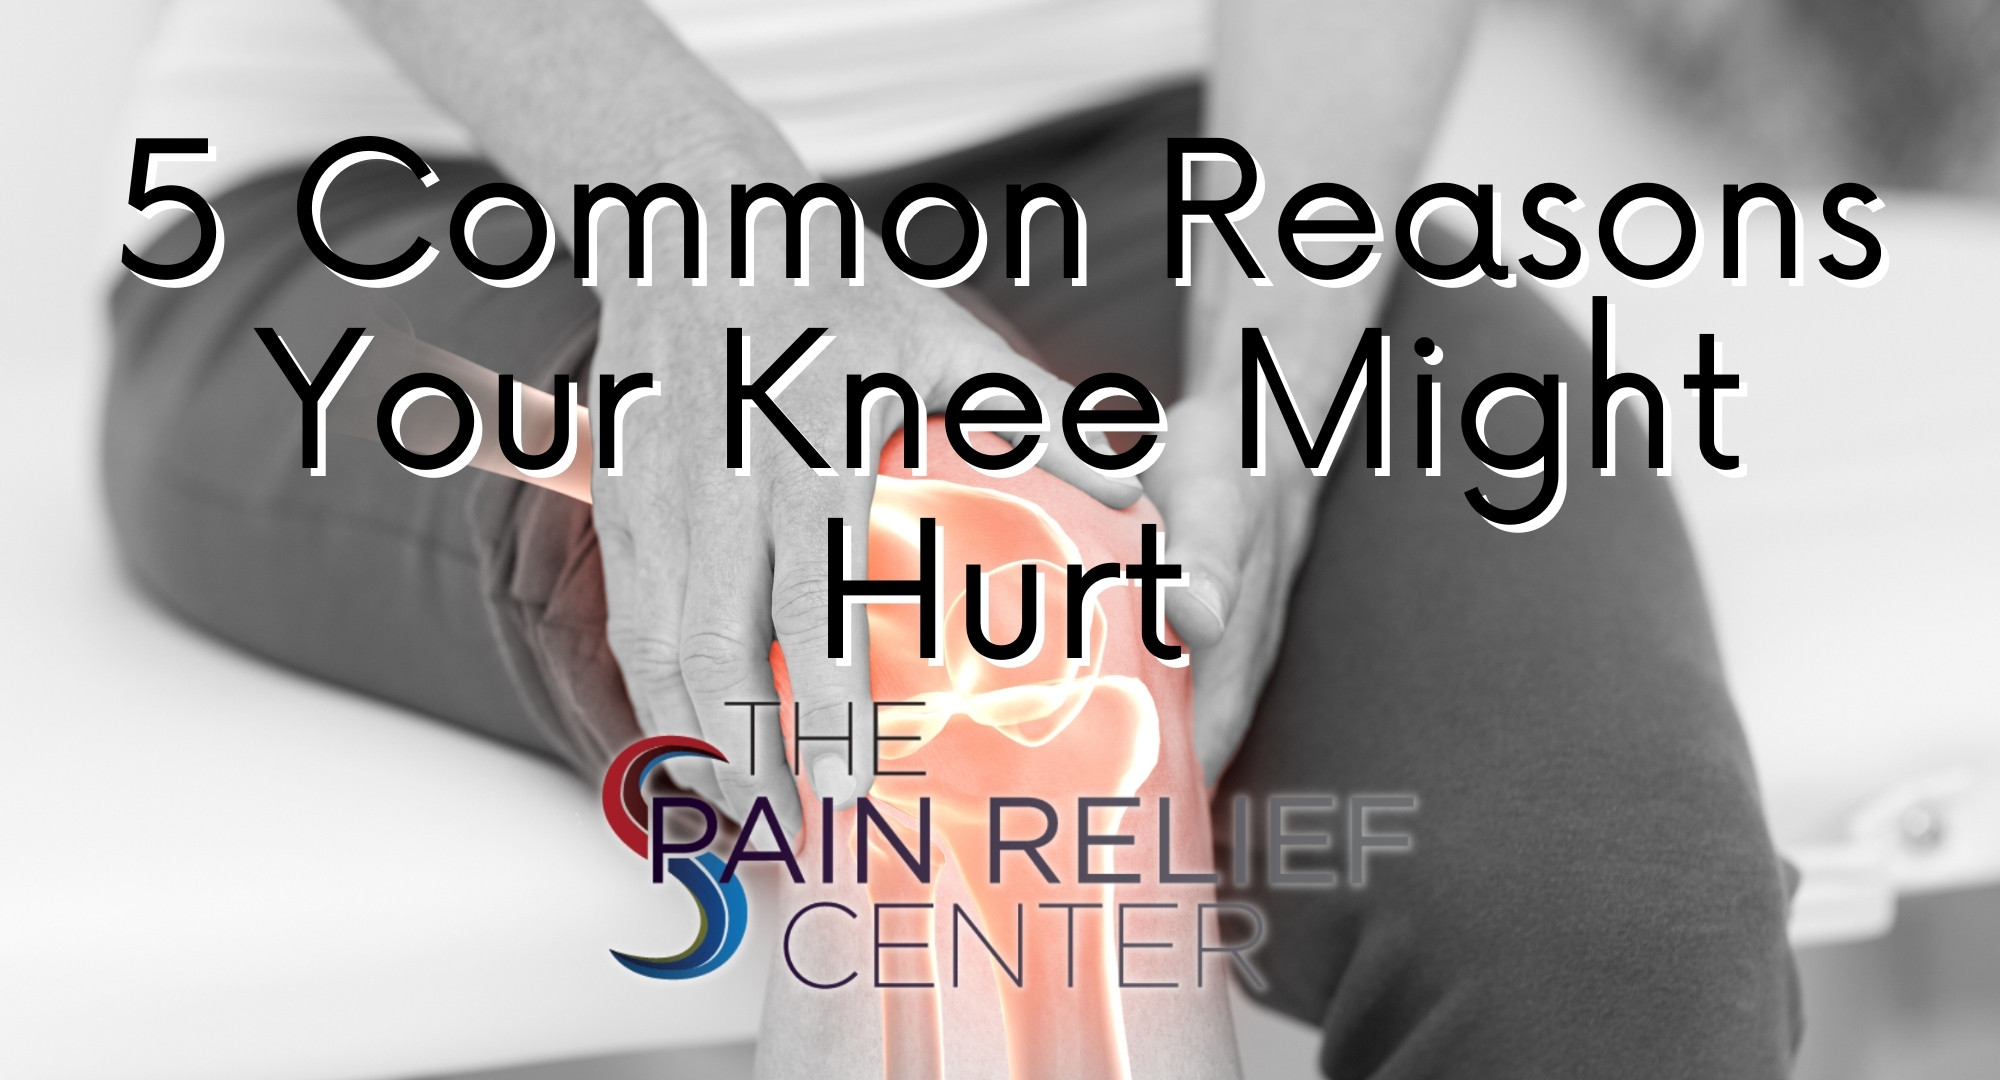 Common Reasons Your Knee Might Hurt